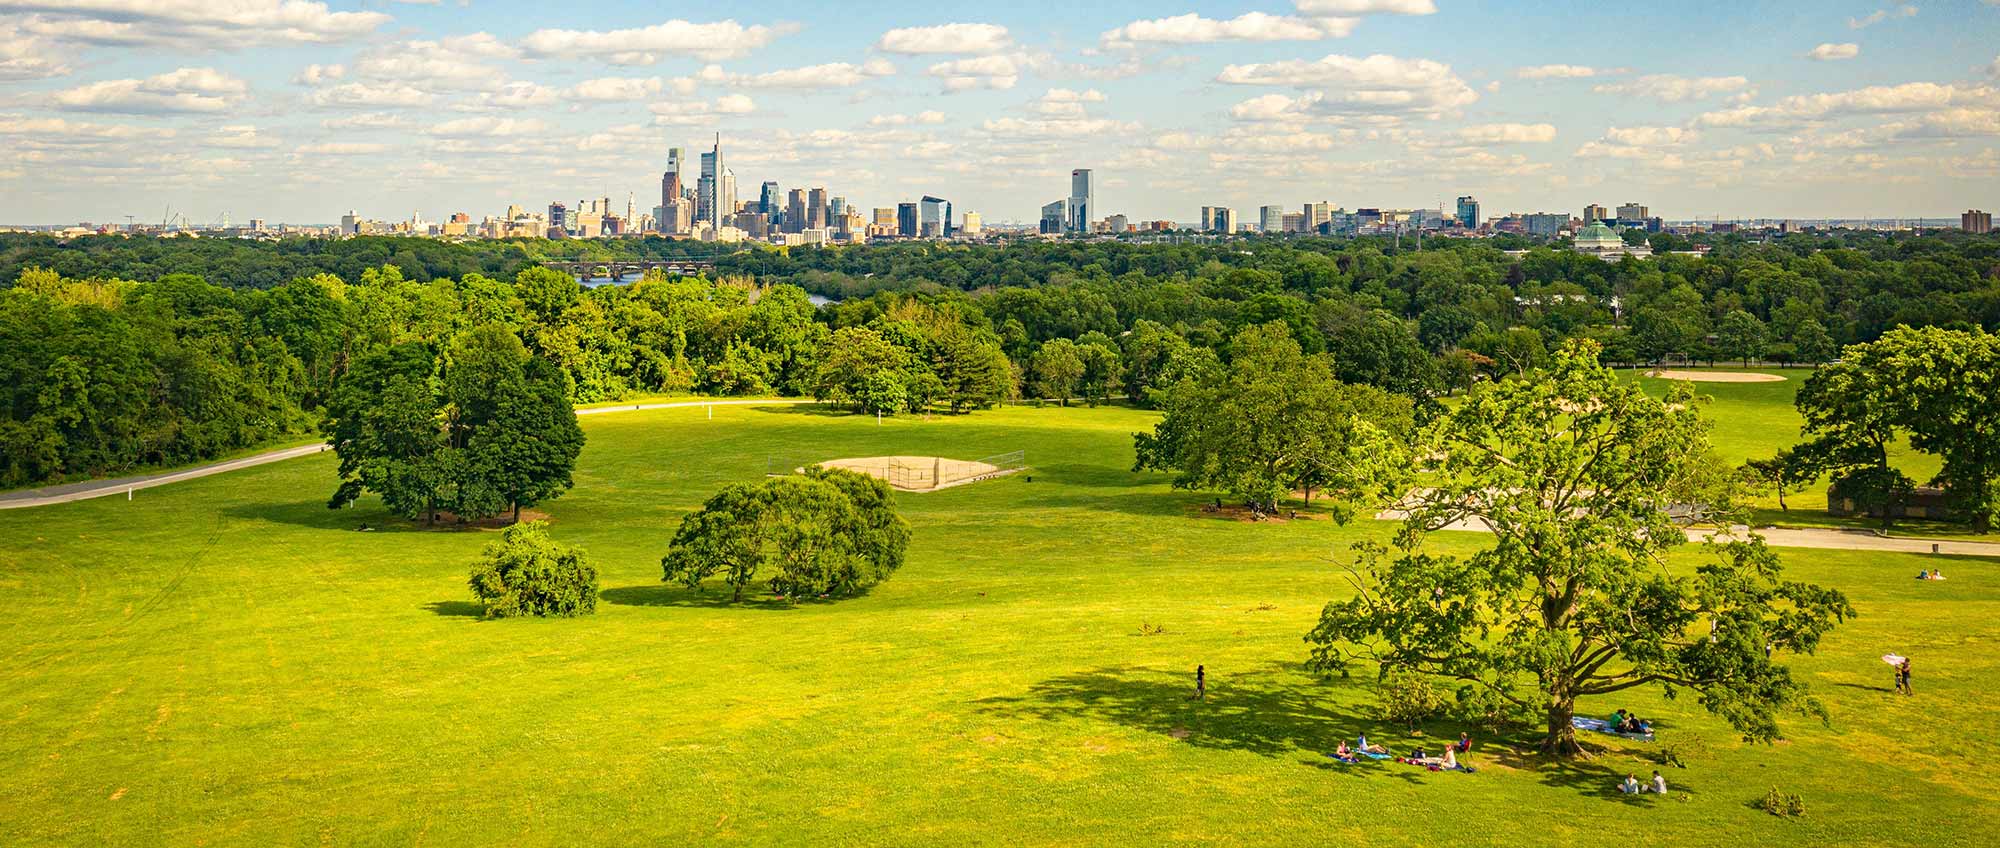 Panoramic backdrop landscape photograph view of a park and the city